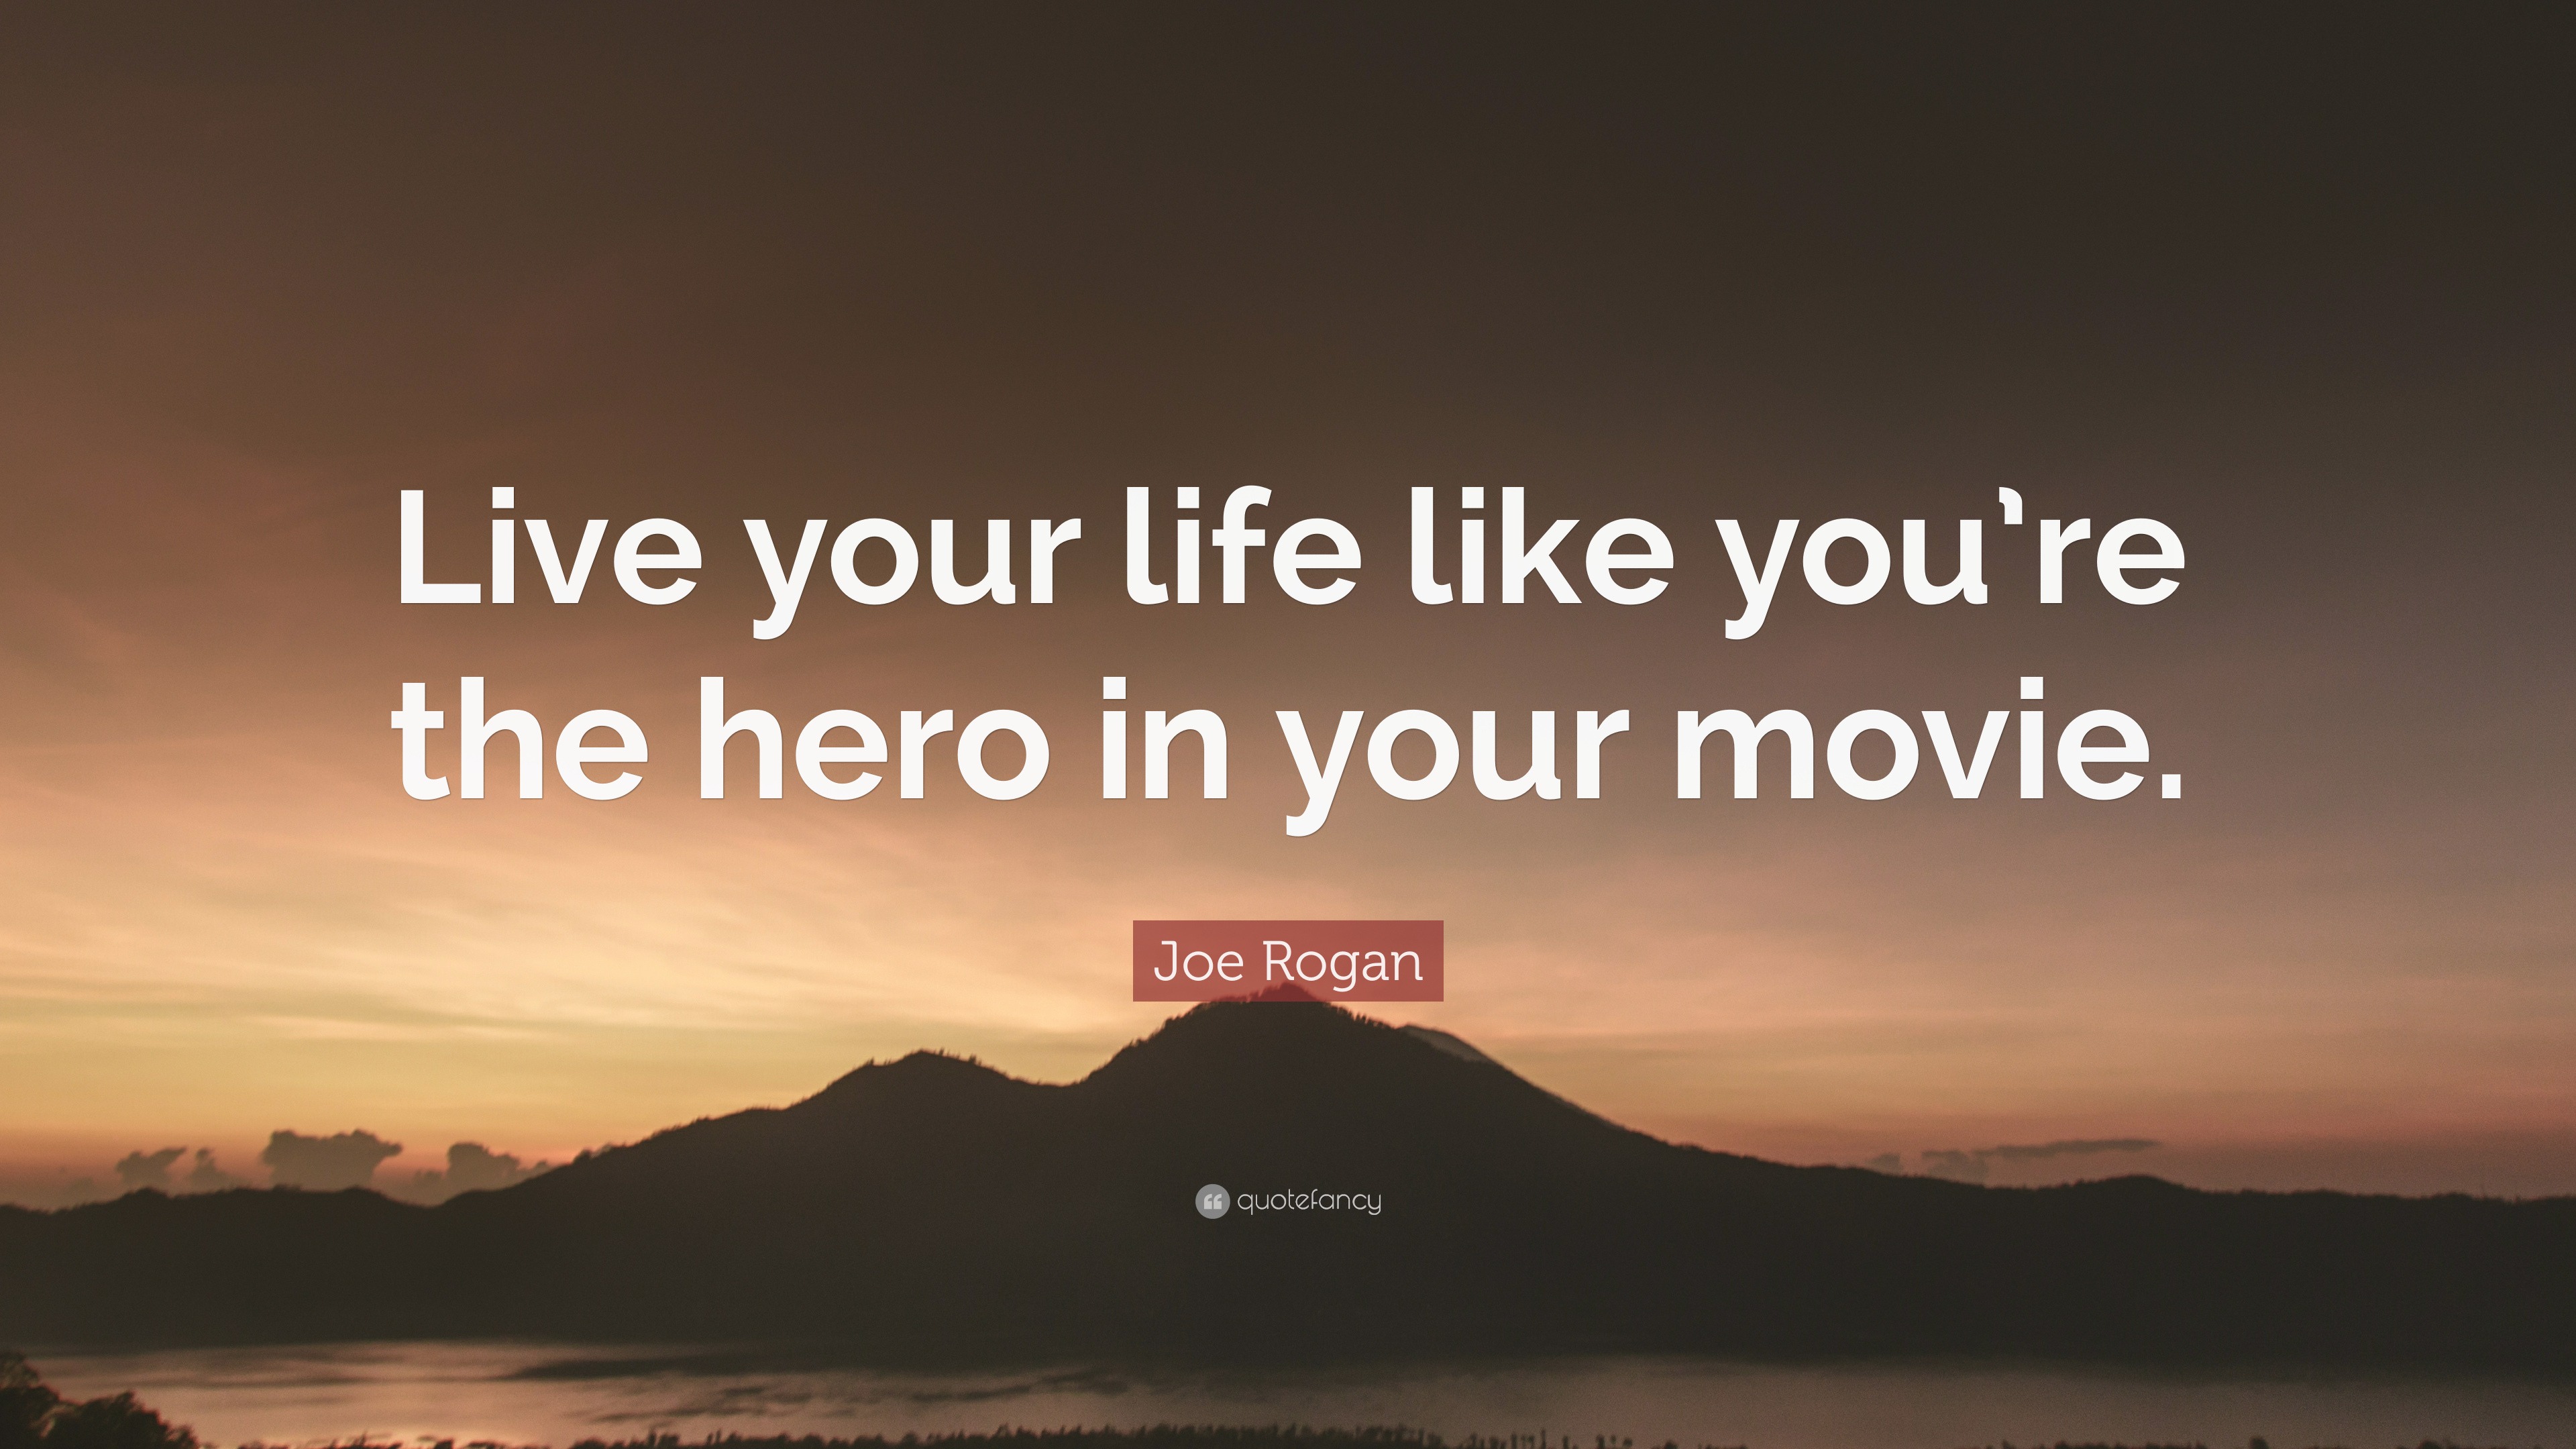 Joe Rogan Quote: “Live your life like you’re the hero in your movie.” (12 ...3840 x 2160